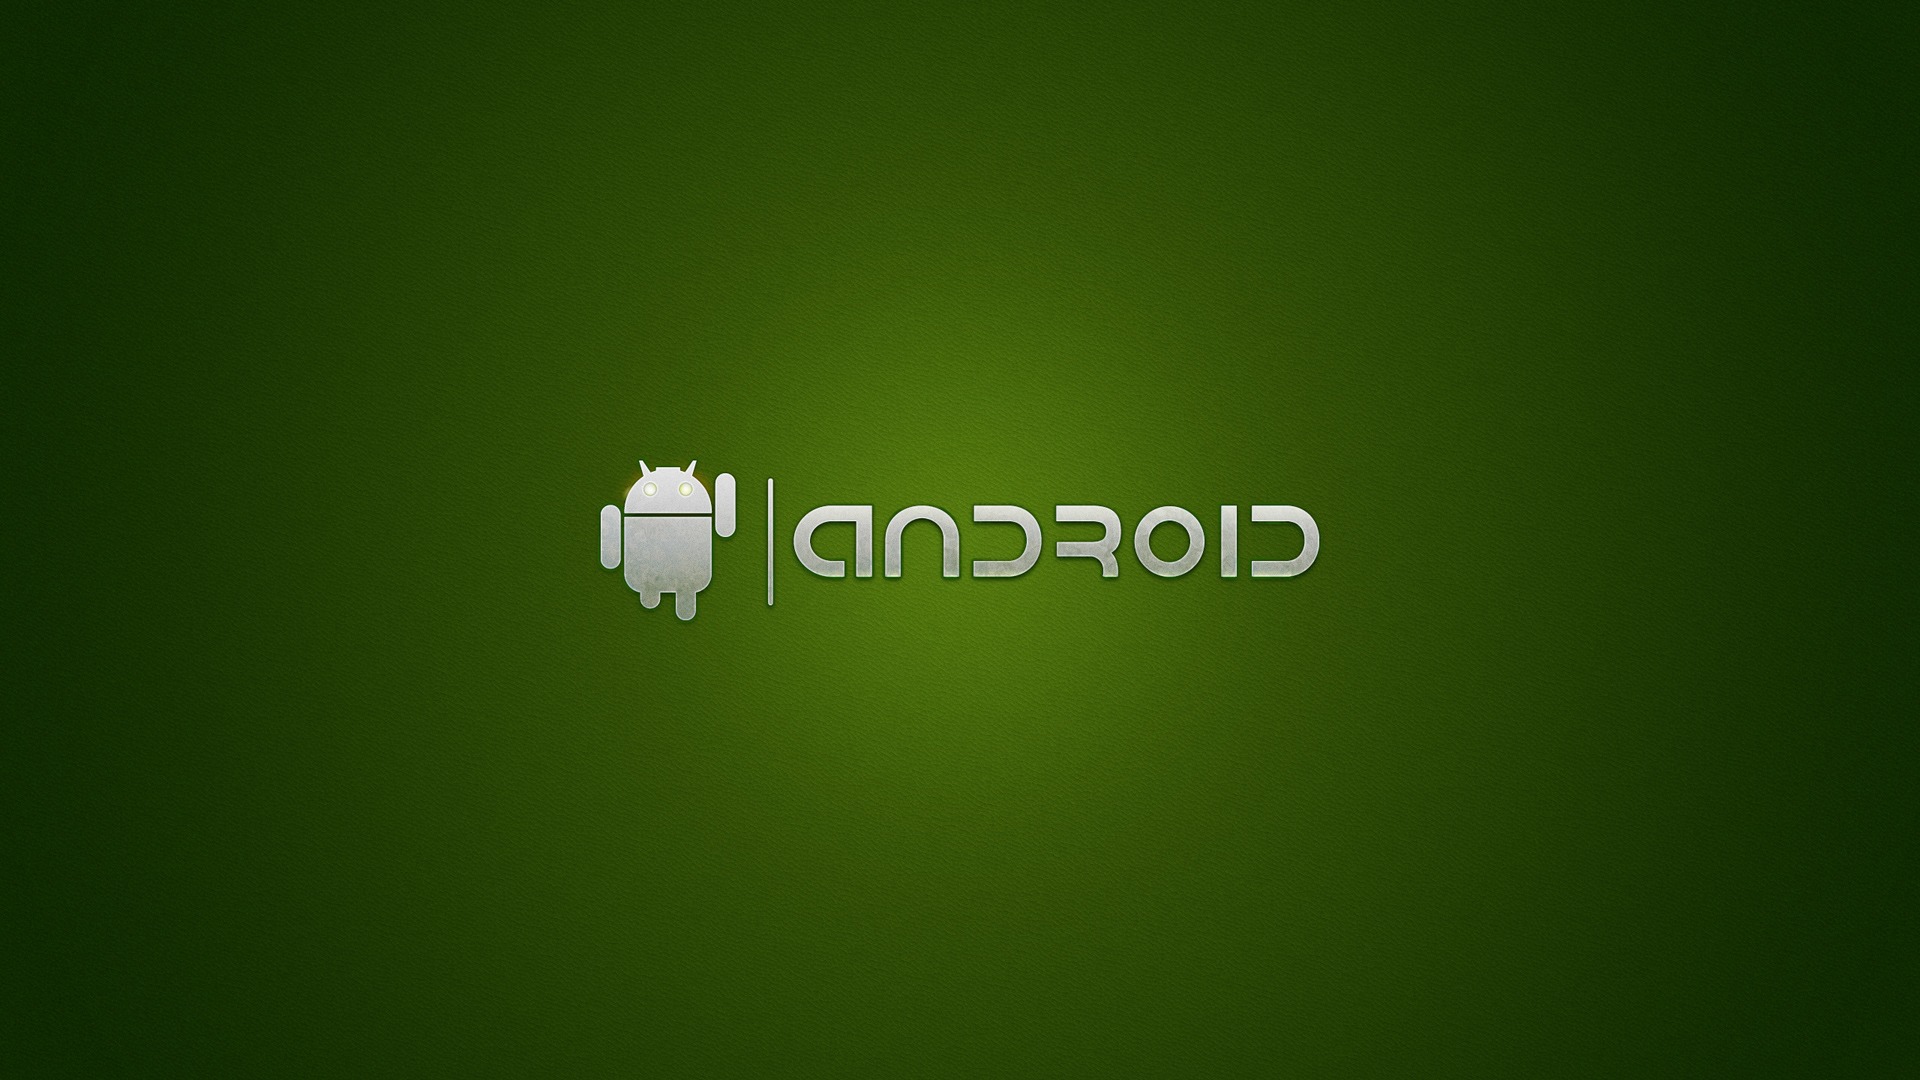 High Quality Android Wallpaper Desktop S Pc